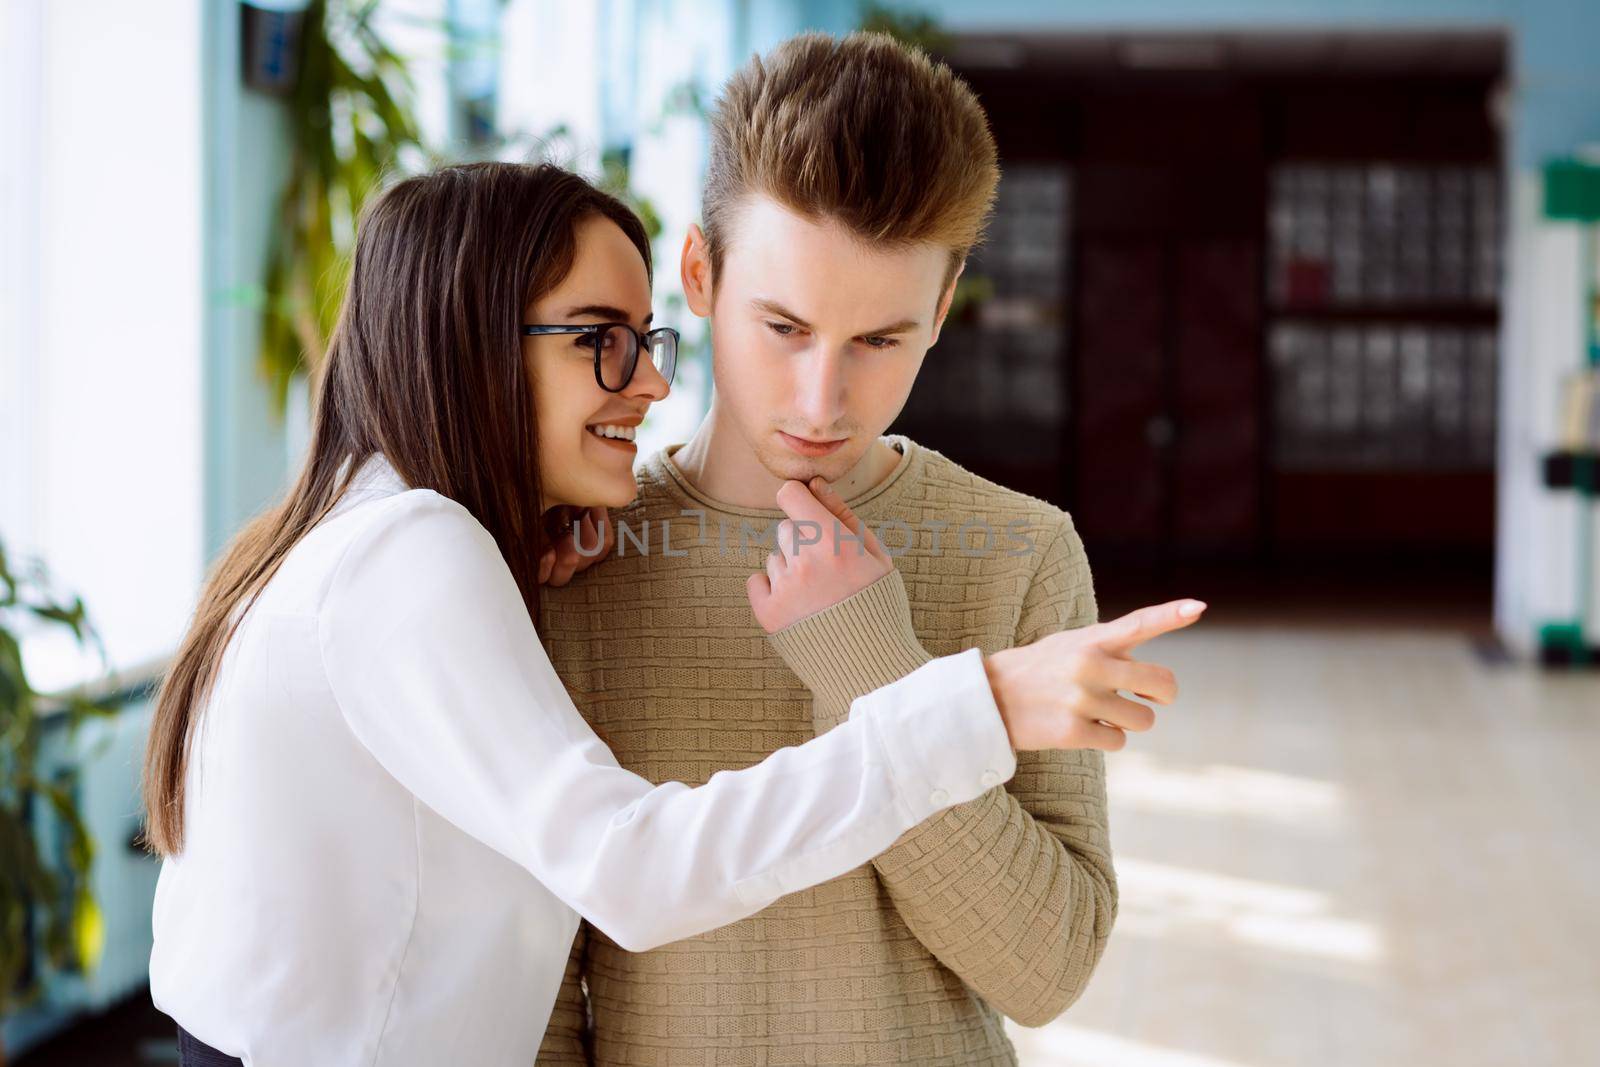 Female student gossiping about classmate to her friend and pointing someone, male friend listens attentively